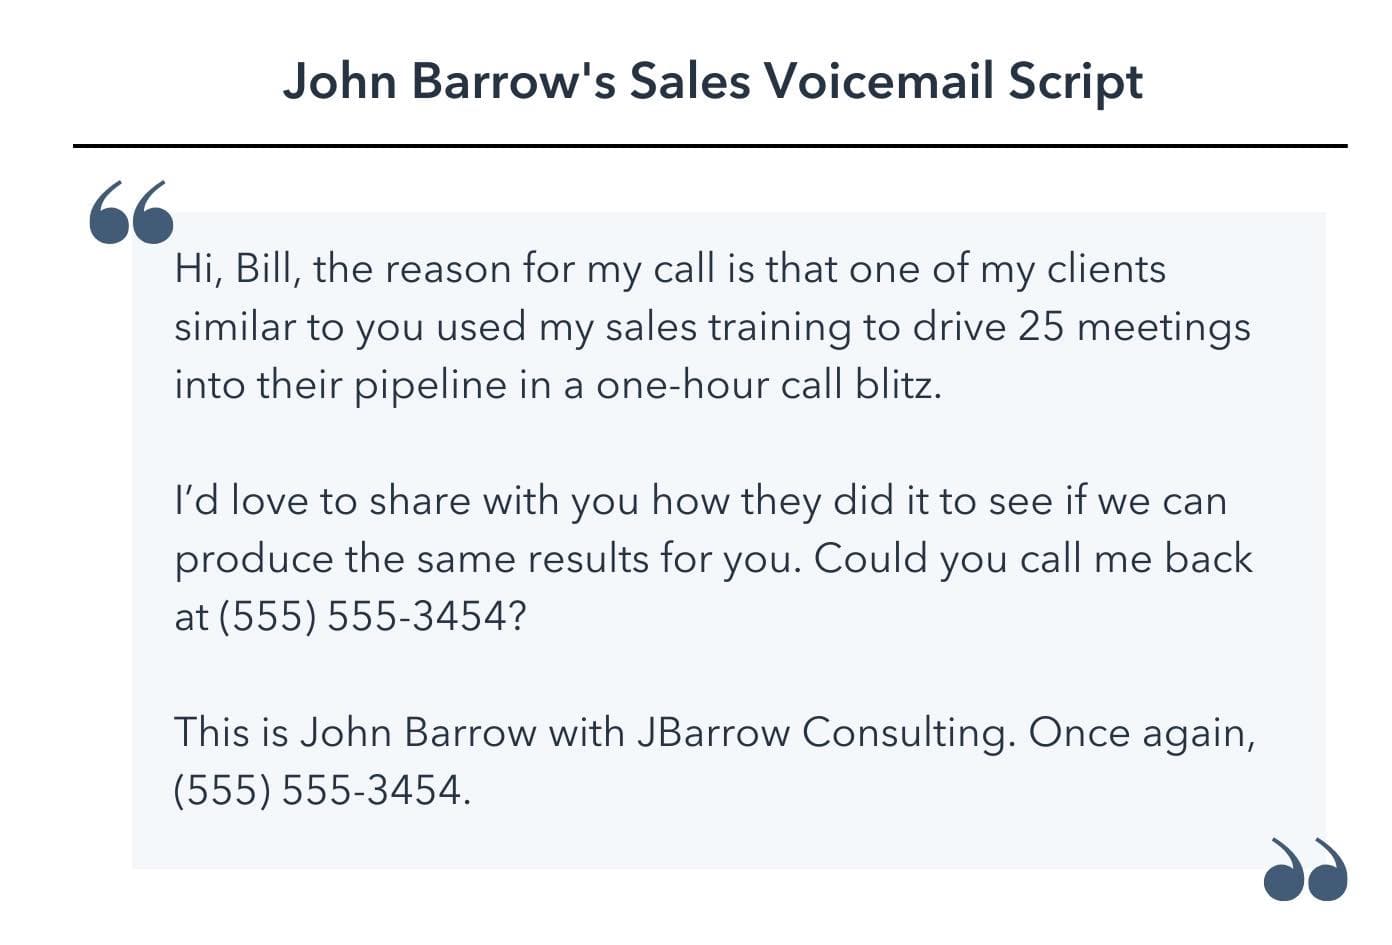  sales voicemail template, Hi, Bill, the reason for my call is that one of my clients similar to you used my sales training to drive 25 meetings into their pipeline in a one-hour call blitz. I’d love to share with you how they did it to see if we can produce the same results for you. Could you call me back at (555) 555-3454? This is John Barrow with JBarrow Consulting. Once again, (555) 555-3454.”